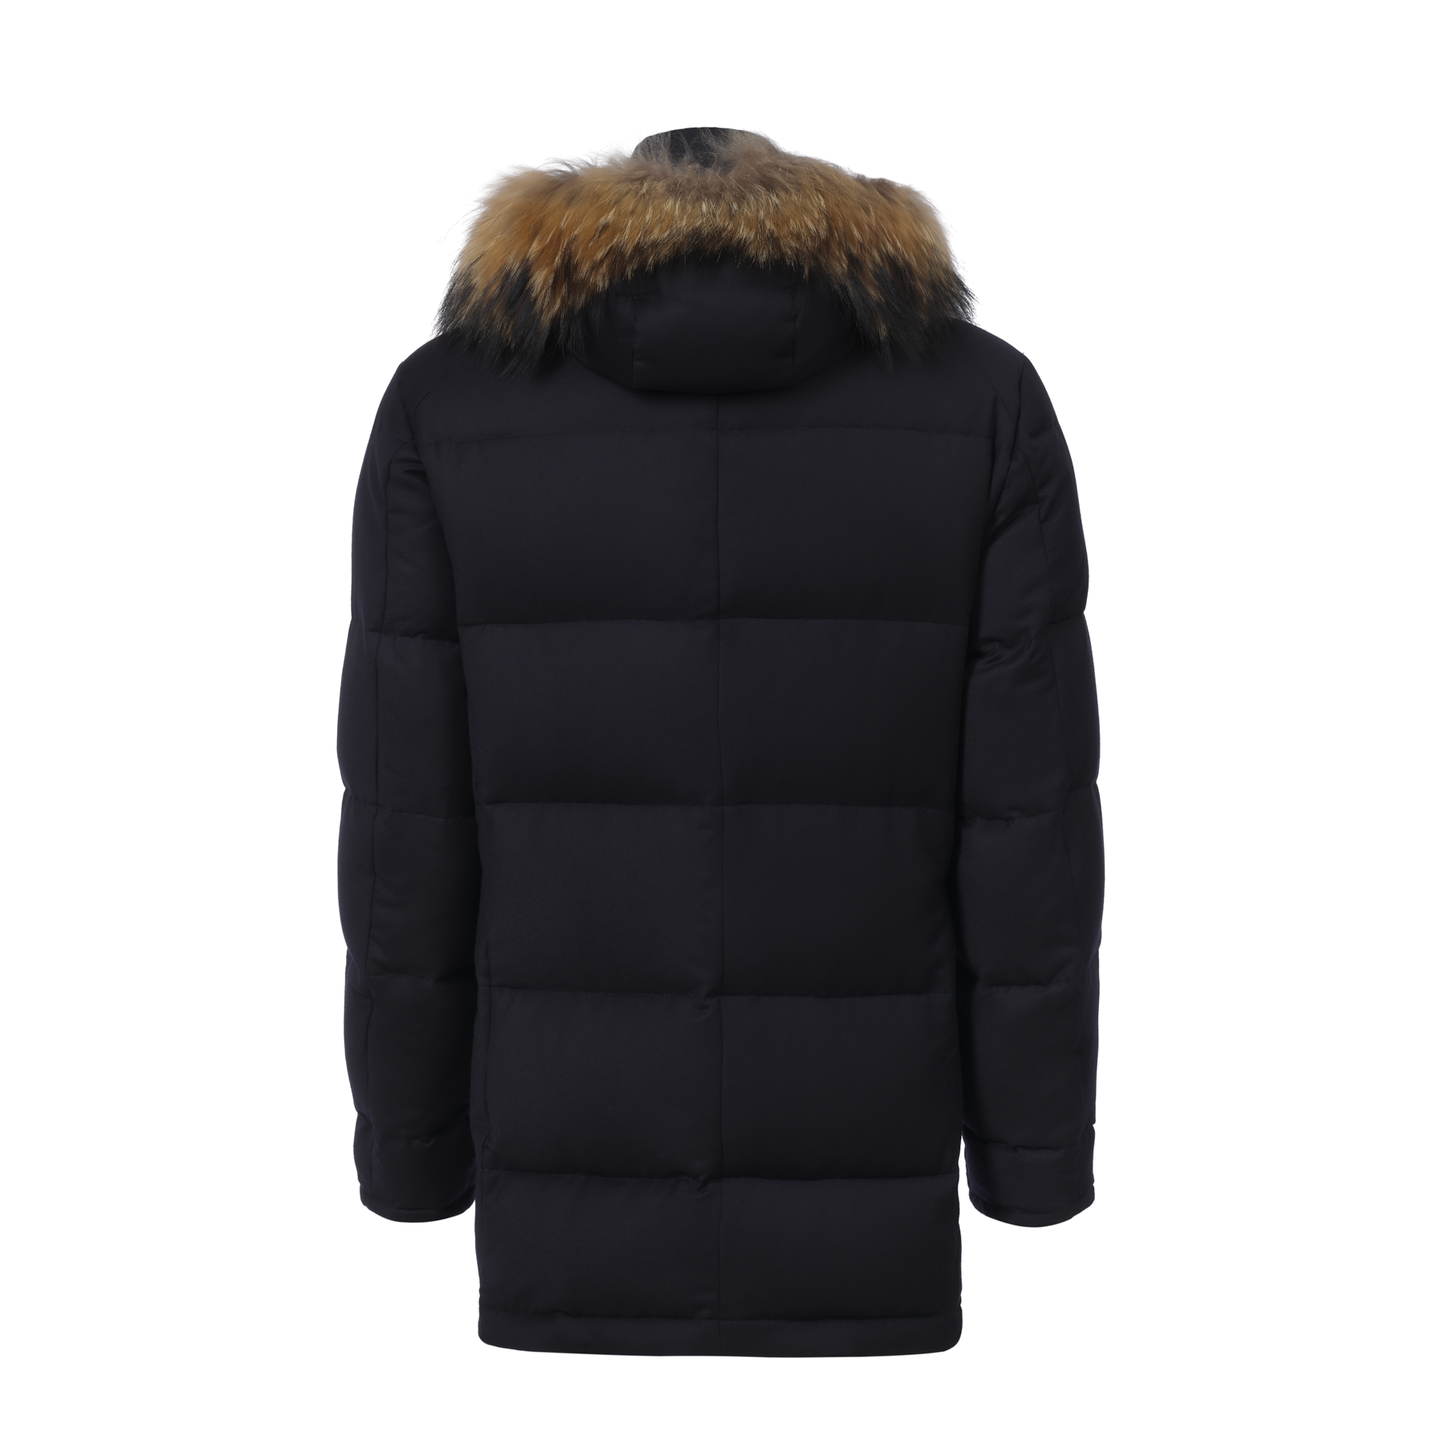 Kired Wool and Cashmere-Blend Down Parka with Fur Trimmed Hood - SARTALE